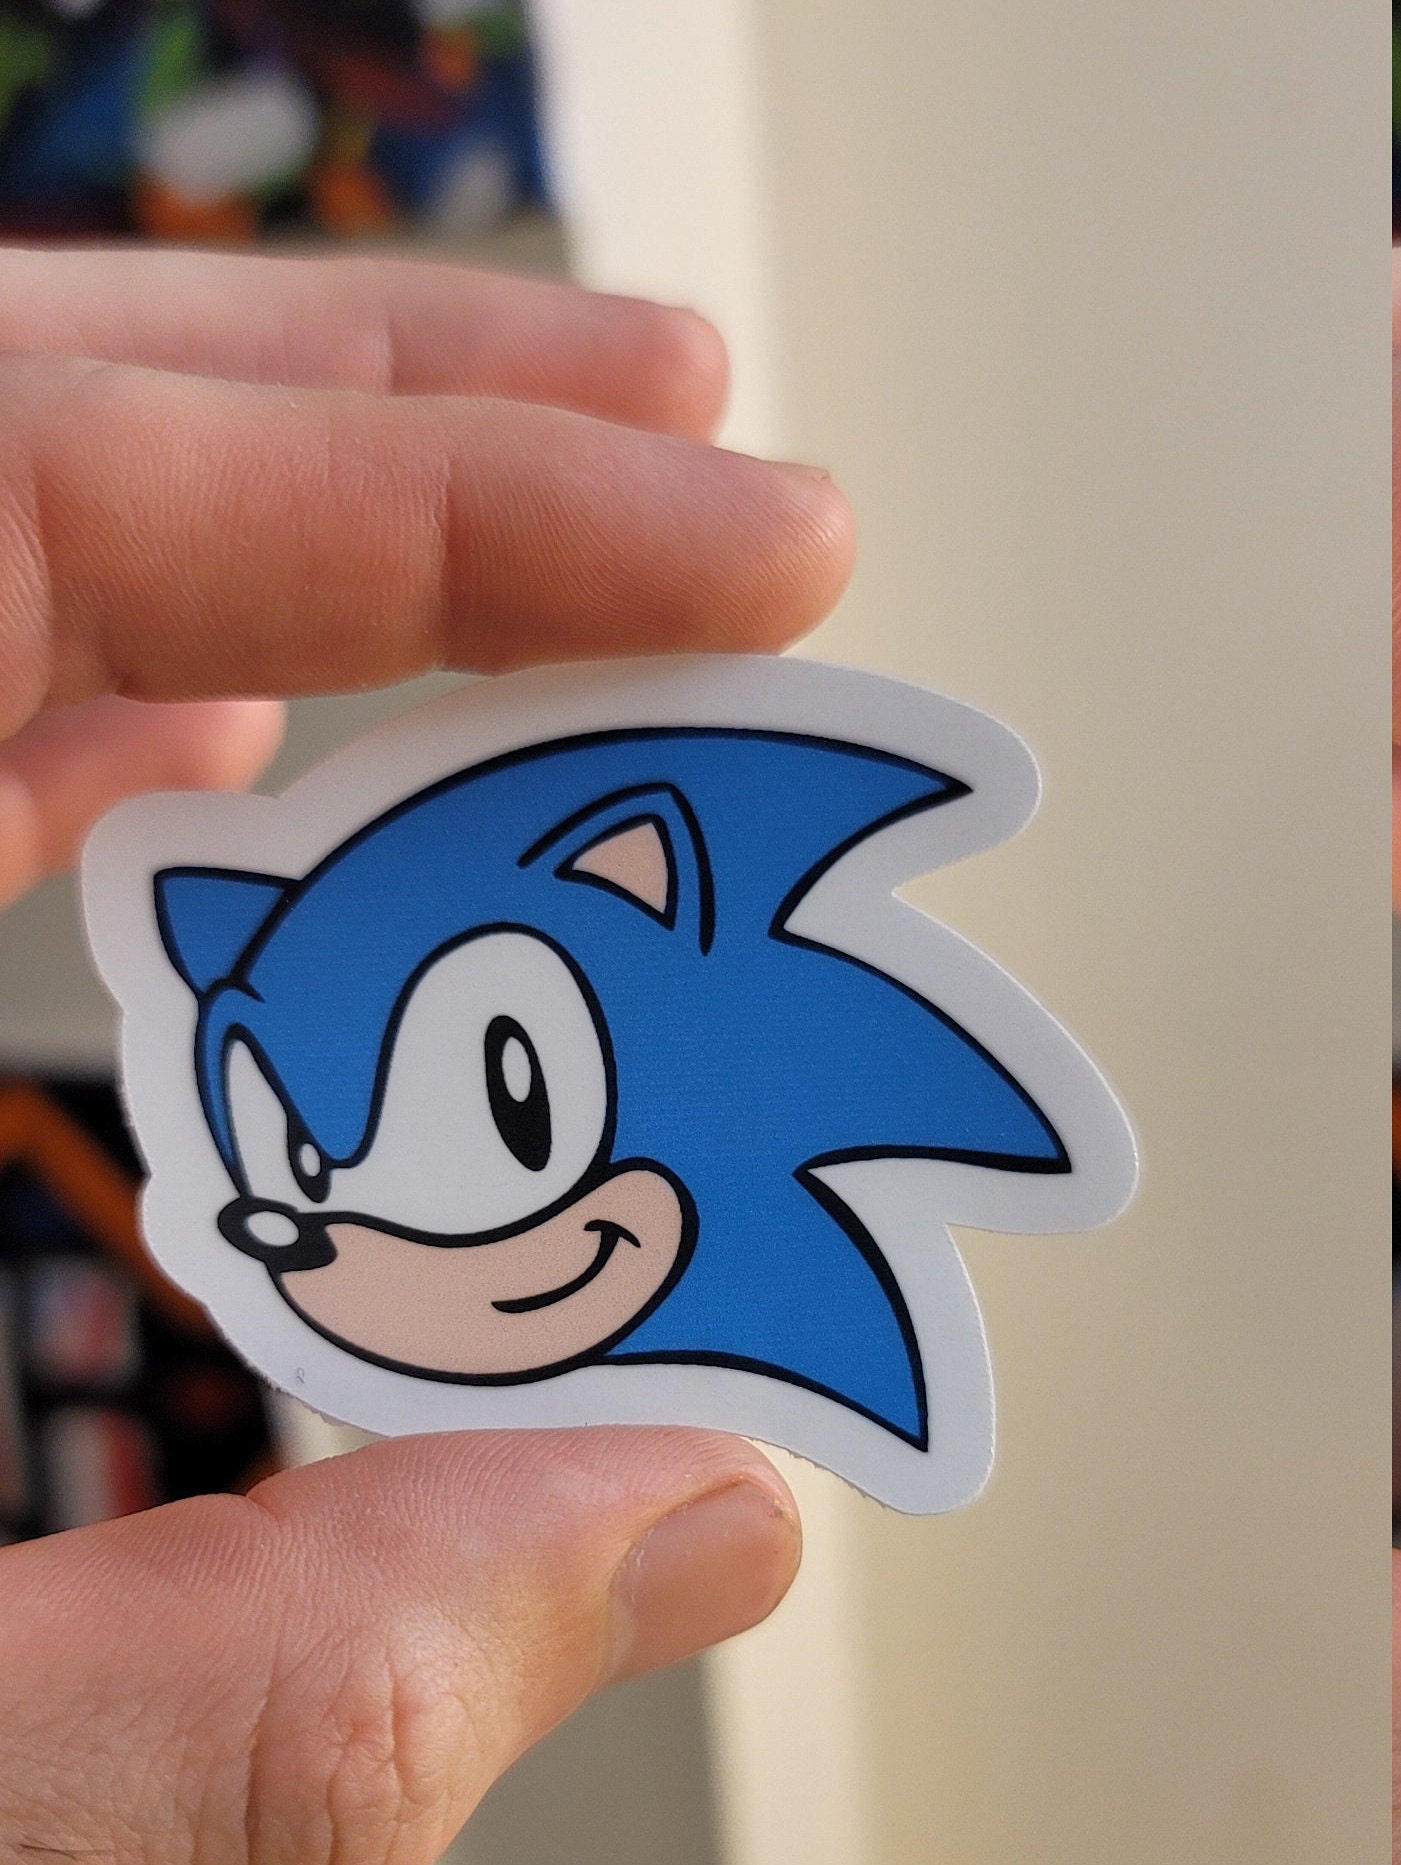 Sonic The Hedgehog Classic #1 3- 6 Vinyl Decal Stickers